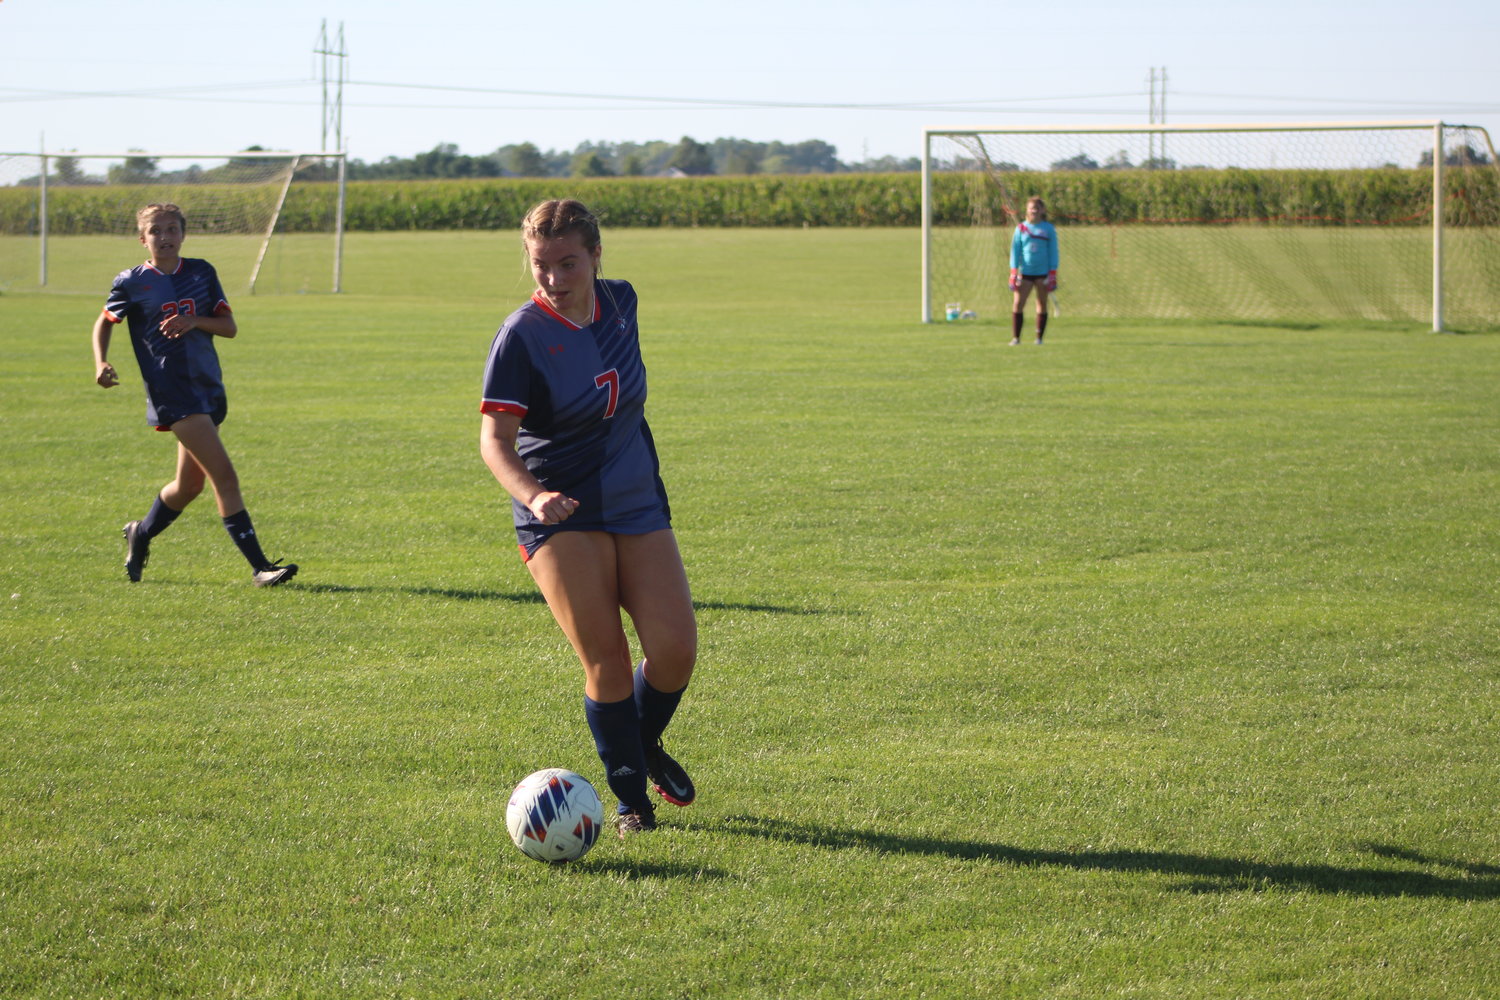 Charger Sophomore Madison Vance helps anchor the back line of the North Montgomery defense.